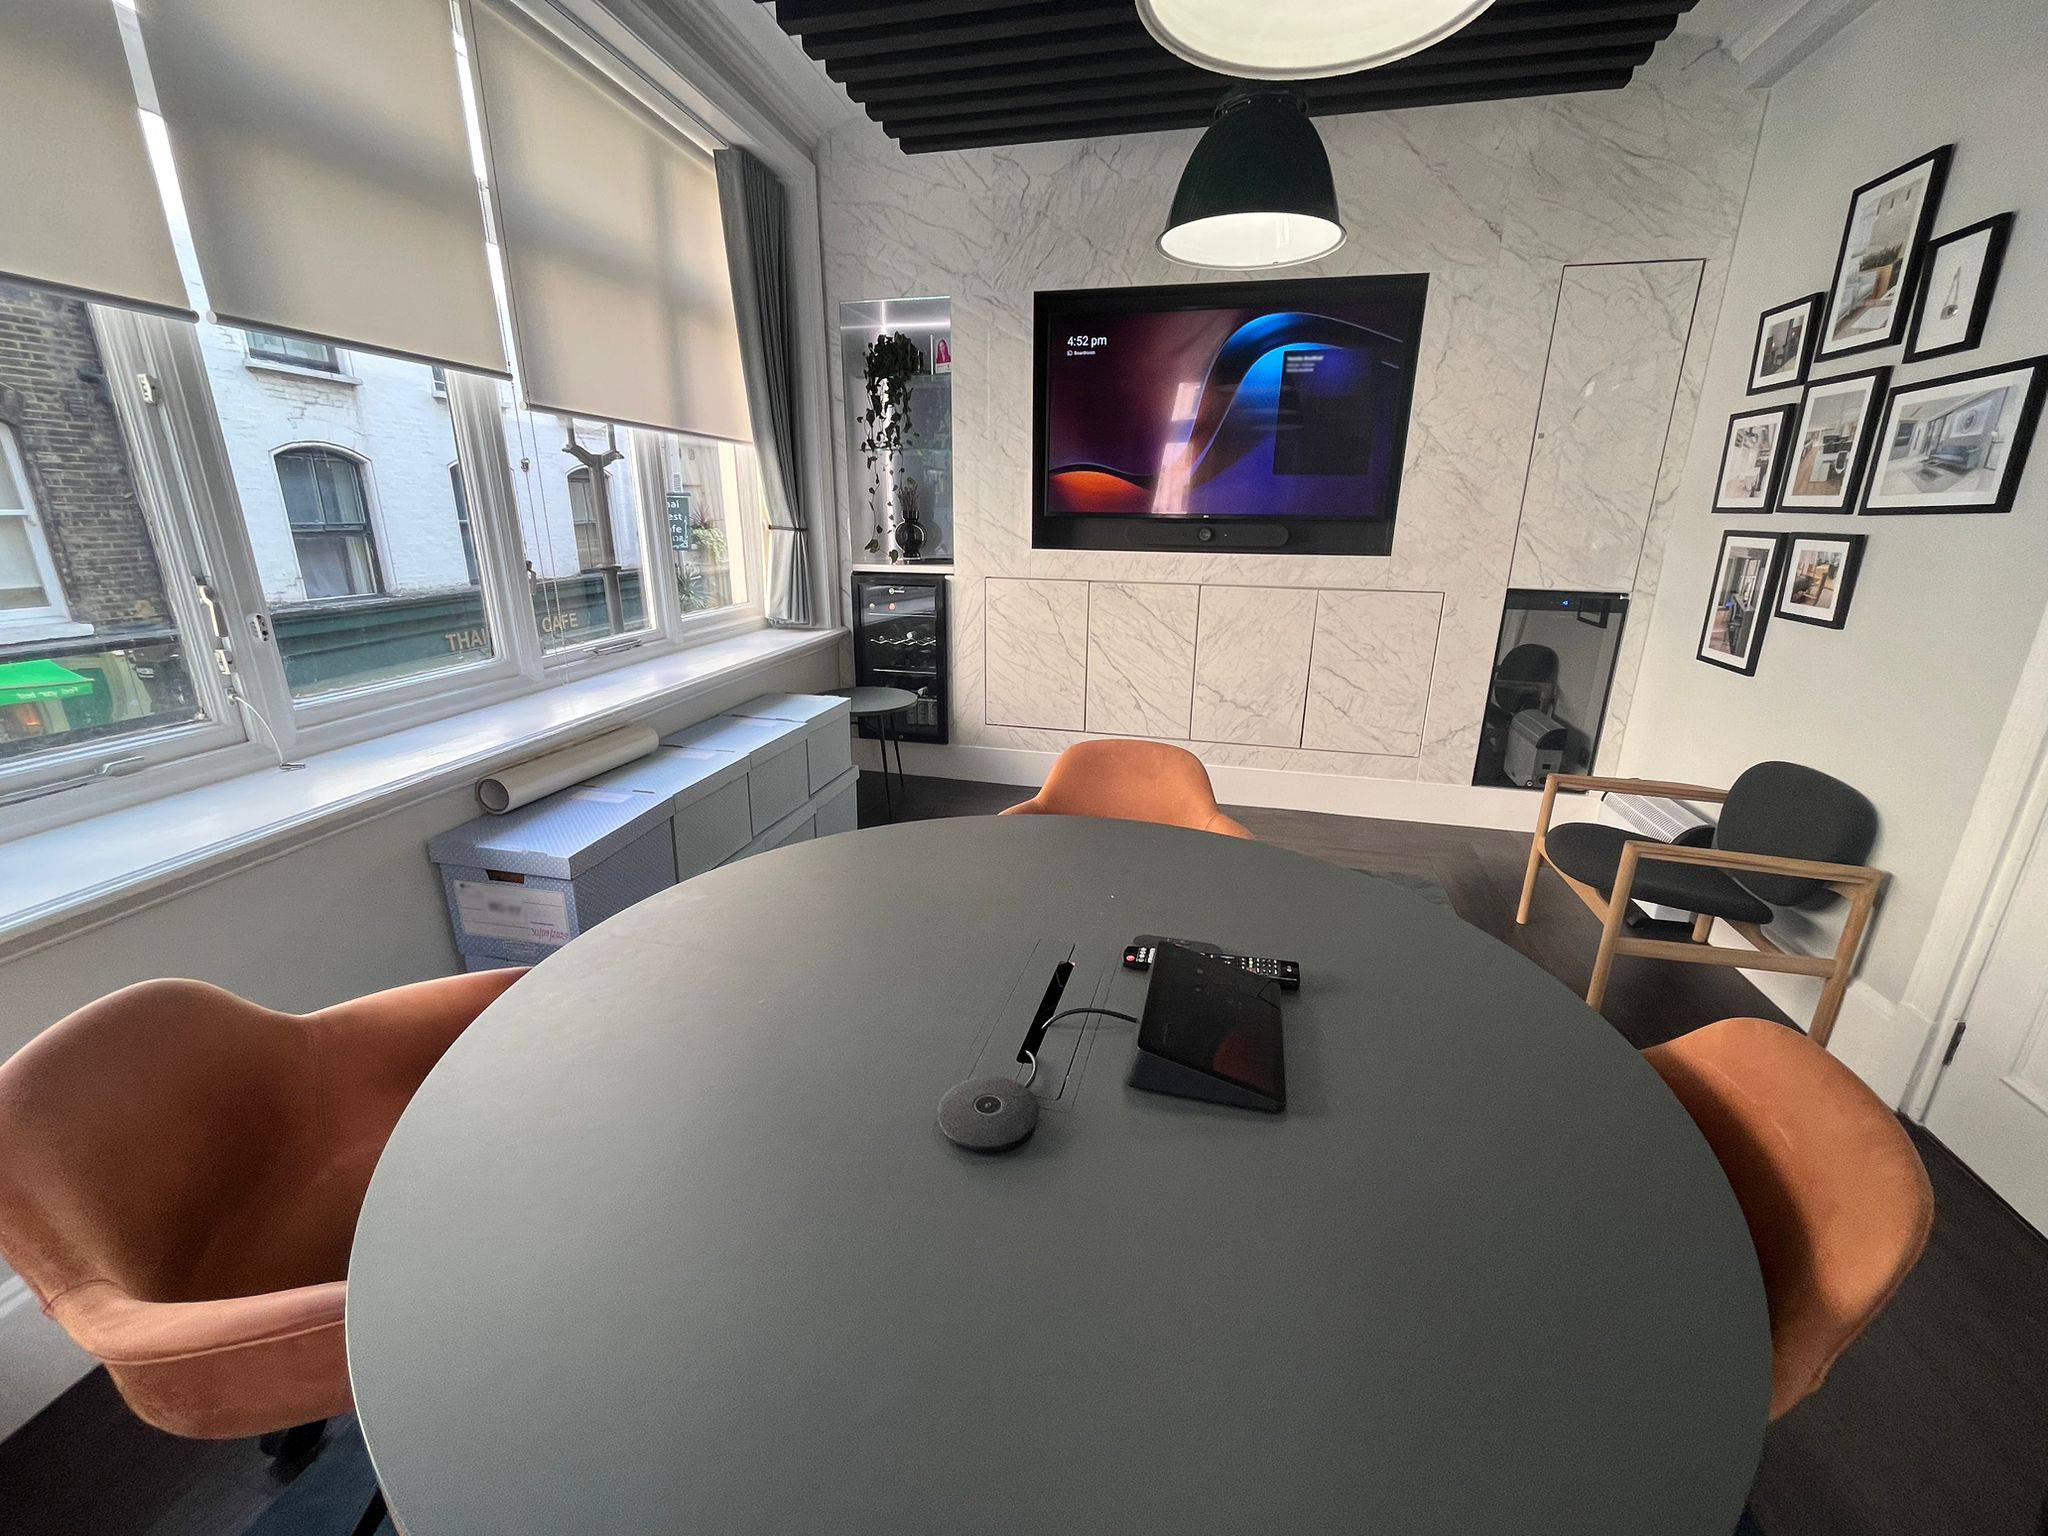 Modern and reliable meeting room audio visual solutions